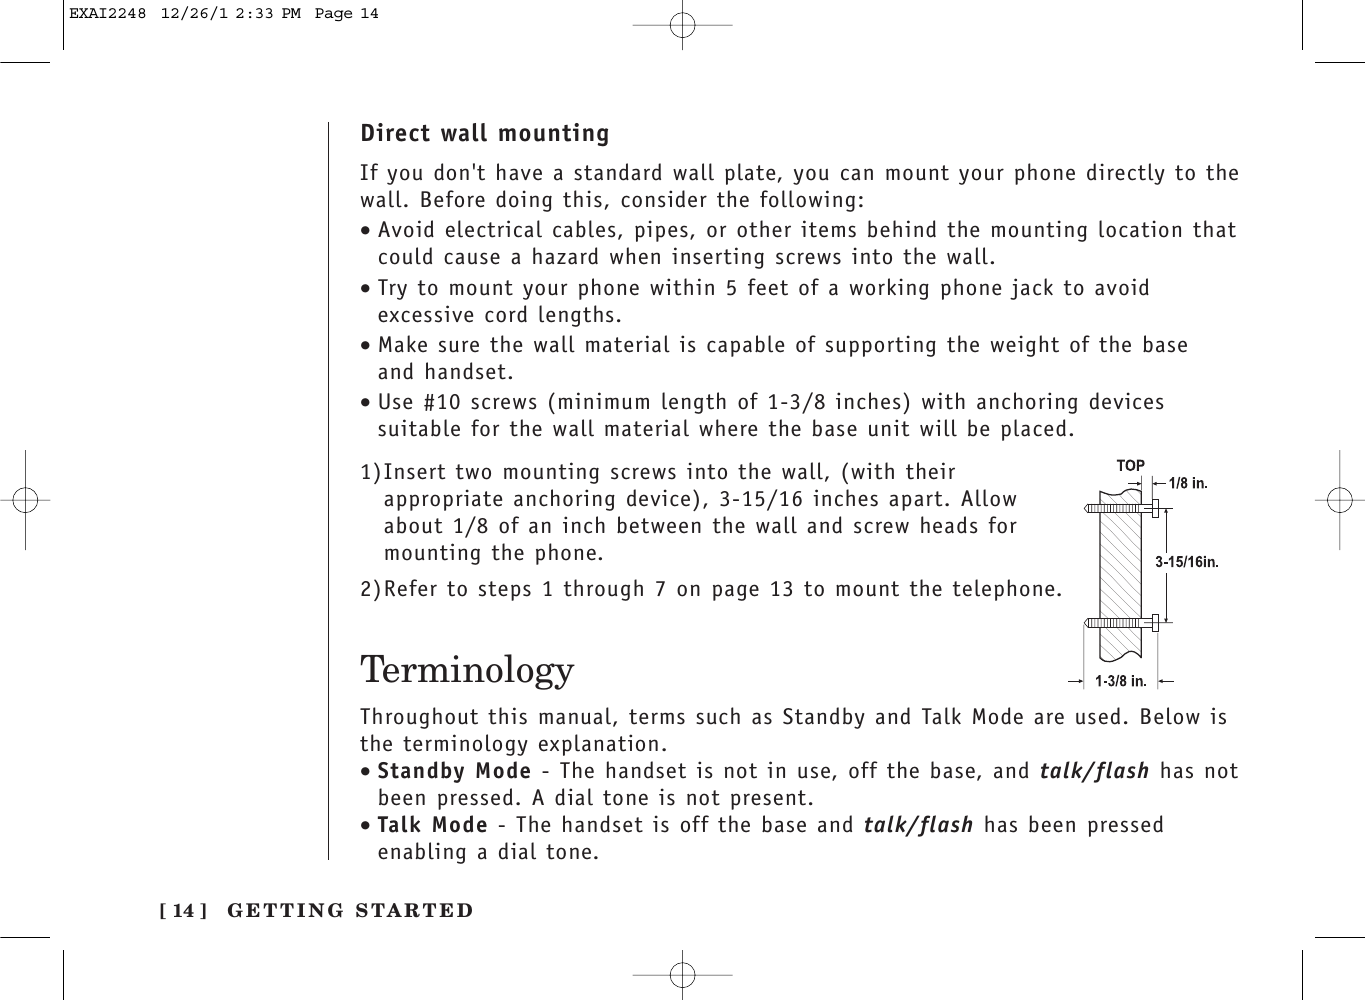 TerminologyThroughout this manual, terms such as Standby and Talk Mode are used. Below isthe terminology explanation.•Standby Mode - The handset is not in use, off the base, and talk/flash has notbeen pressed. A dial tone is not present.•Talk Mode - The handset is off the base and talk/flash has been pressedenabling a dial tone.[ 14 ] GETTING STARTEDDirect wall mountingIf you don&apos;t have a standard wall plate, you can mount your phone directly to thewall. Before doing this, consider the following:•Avoid electrical cables, pipes, or other items behind the mounting location thatcould cause a hazard when inserting screws into the wall.•Try to mount your phone within 5 feet of a working phone jack to avoidexcessive cord lengths.•Make sure the wall material is capable of supporting the weight of the base and handset.•Use #10 screws (minimum length of 1-3/8 inches) with anchoring devicessuitable for the wall material where the base unit will be placed.1)Insert two mounting screws into the wall, (with theirappropriate anchoring device), 3-15/16 inches apart. Allowabout 1/8 of an inch between the wall and screw heads formounting the phone.2)Refer to steps 1 through 7 on page 13 to mount the telephone.EXAI2248  12/26/1 2:33 PM  Page 14